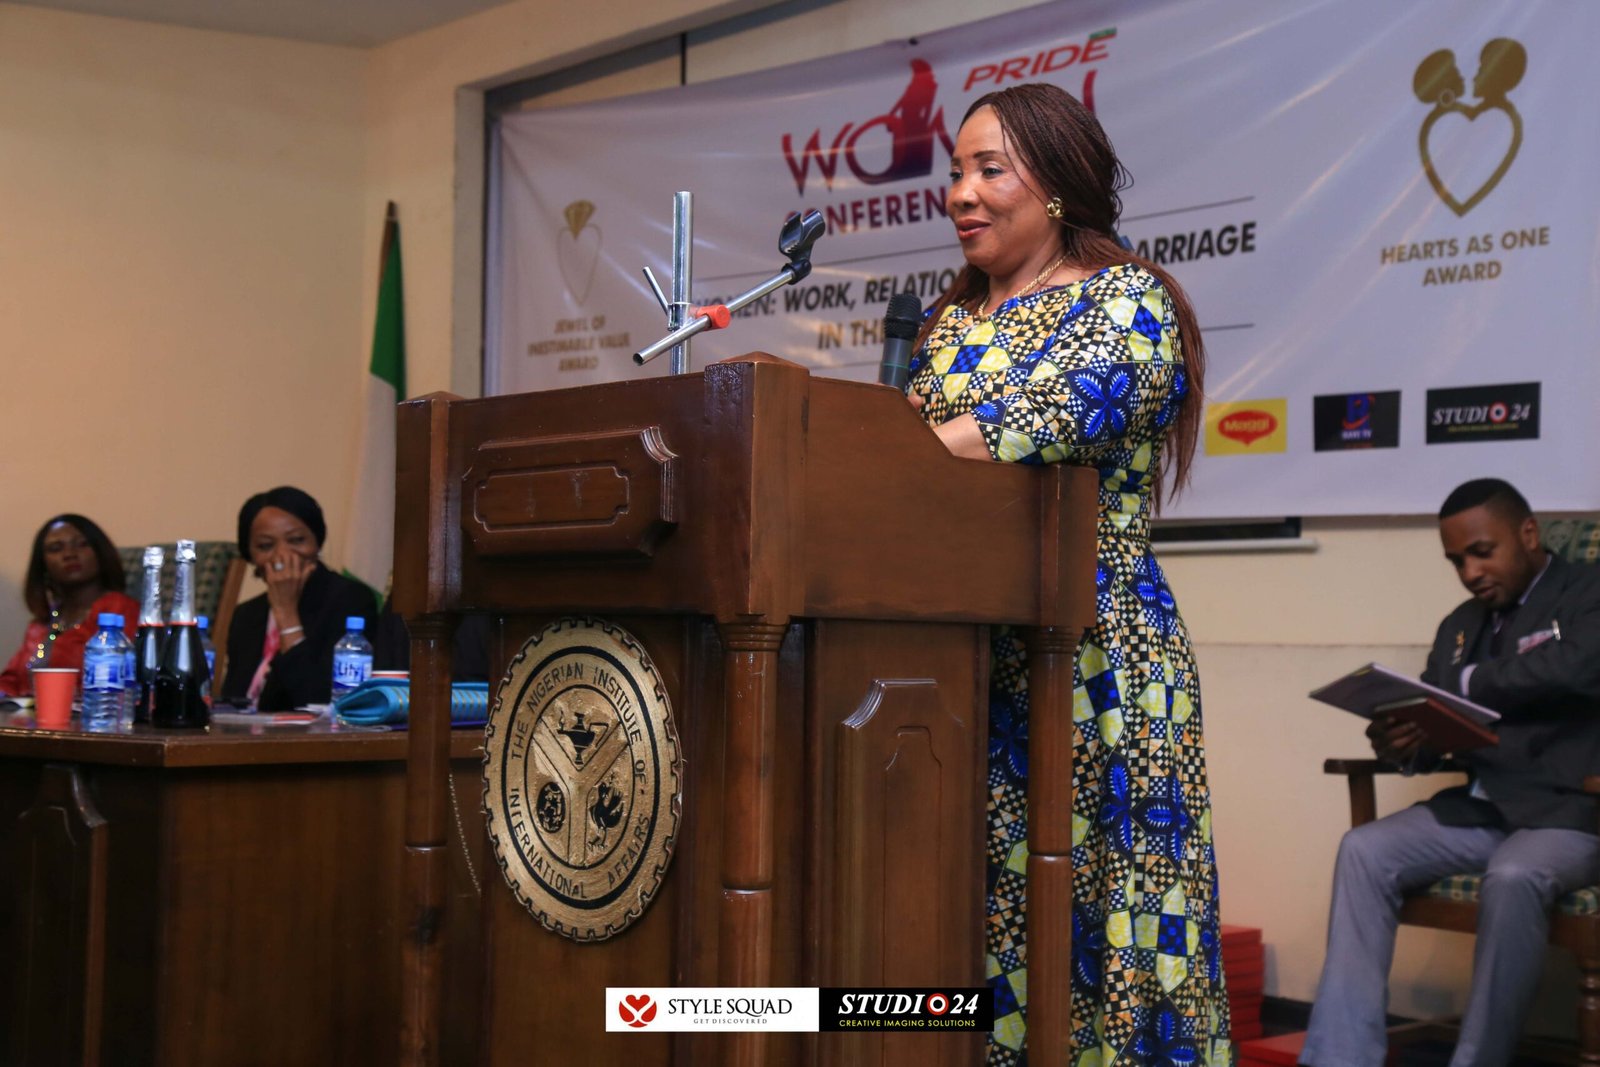 Pride Women Conference 2017 work women and marriage in the 21st century, building a female brand, female empowerment and development in Nigeria, SDGs goal 5, sound mental health and well being among women in Nigeria, Mrs Akpuru